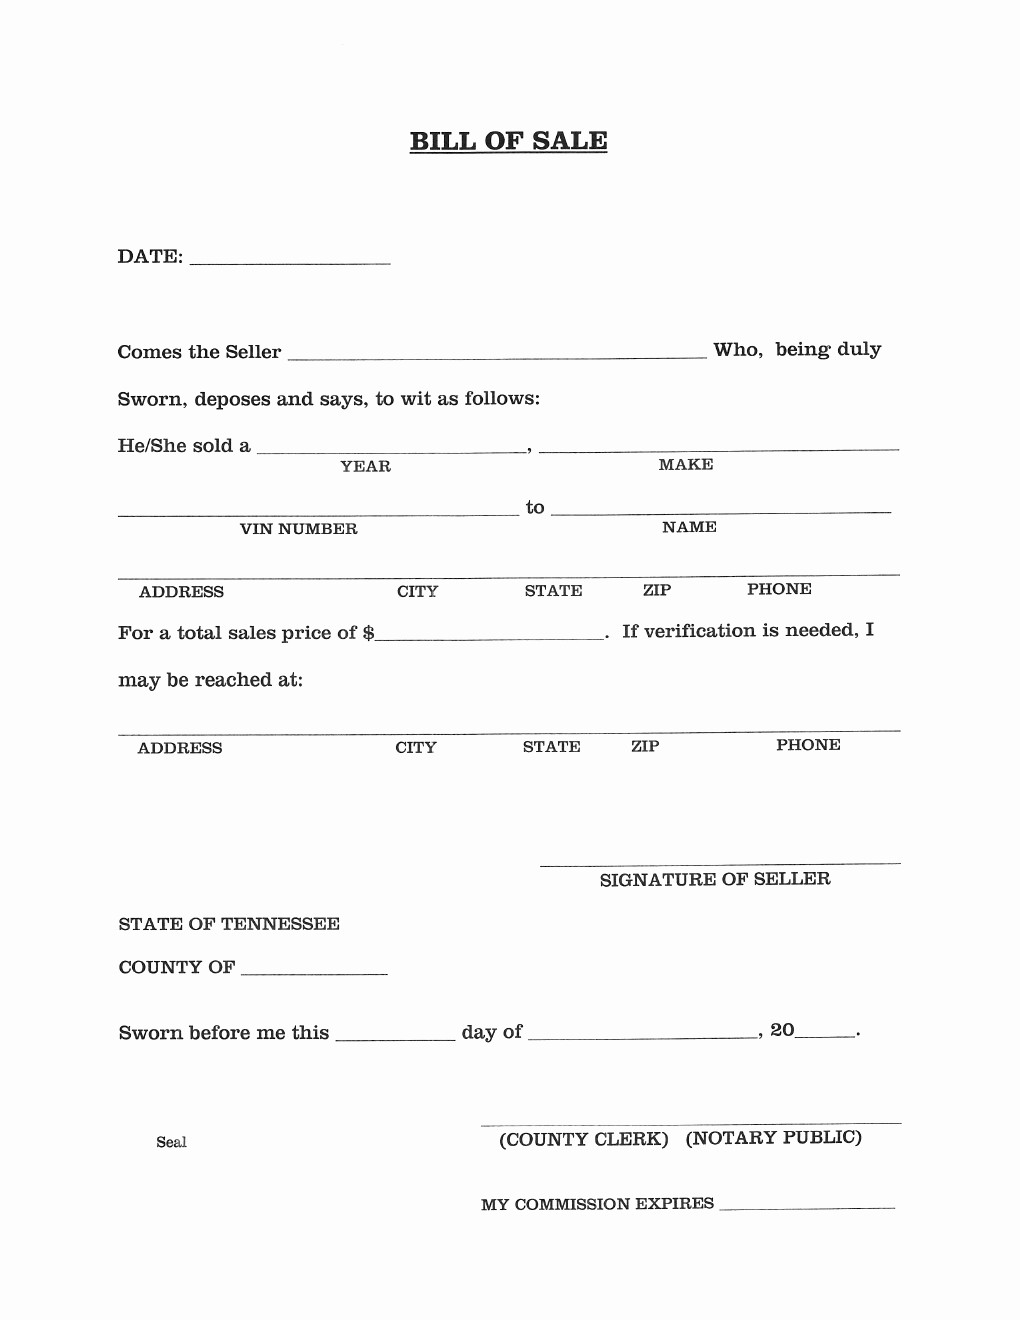 Bill Of Sale Auto form Luxury Free Tennessee Vehicle Bill Of Sale form Download Pdf